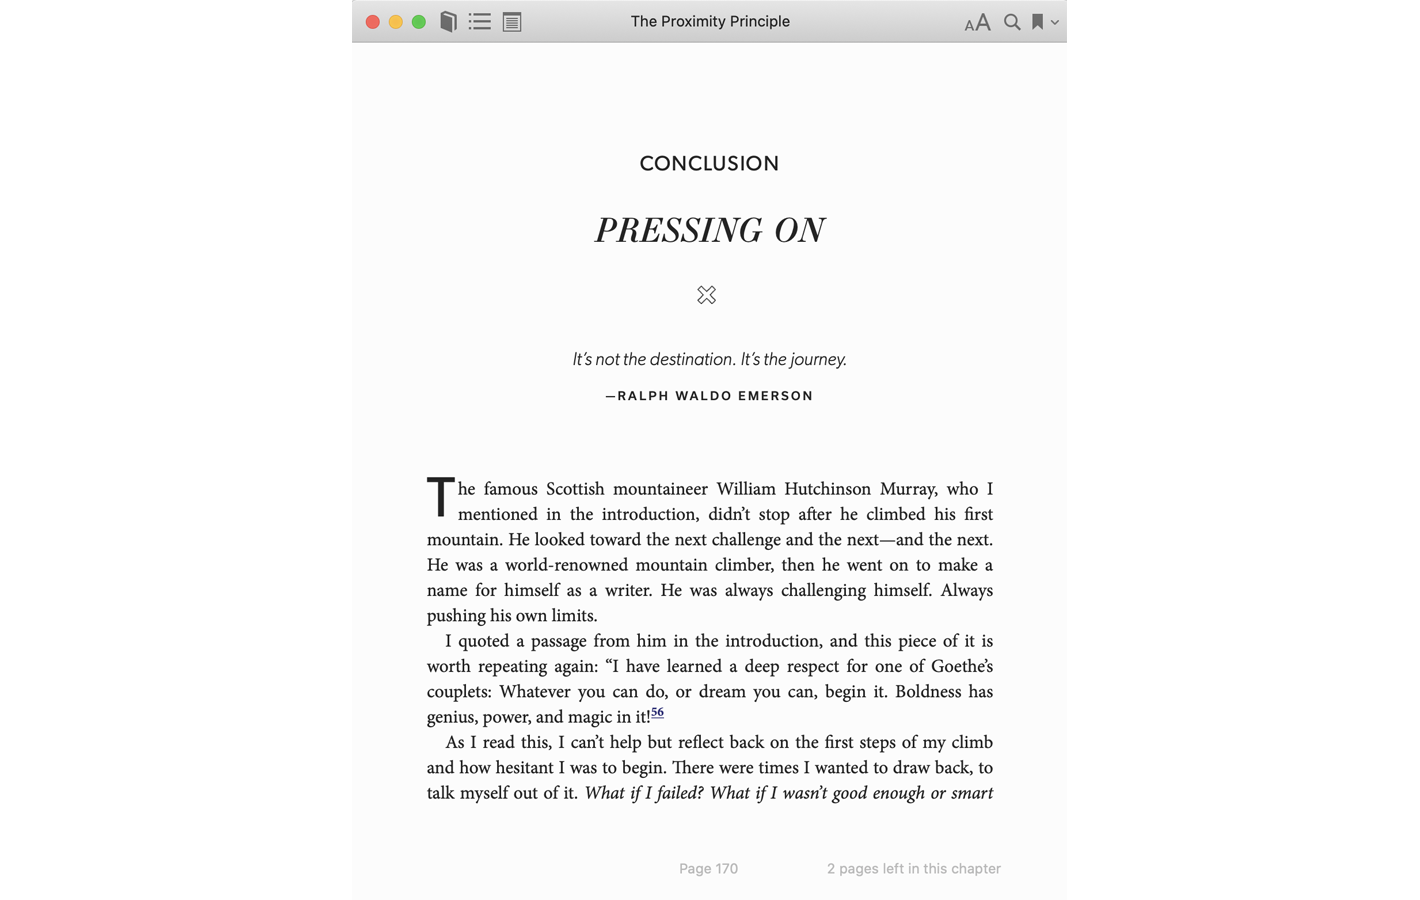 Page 170 for The Proximity Principle